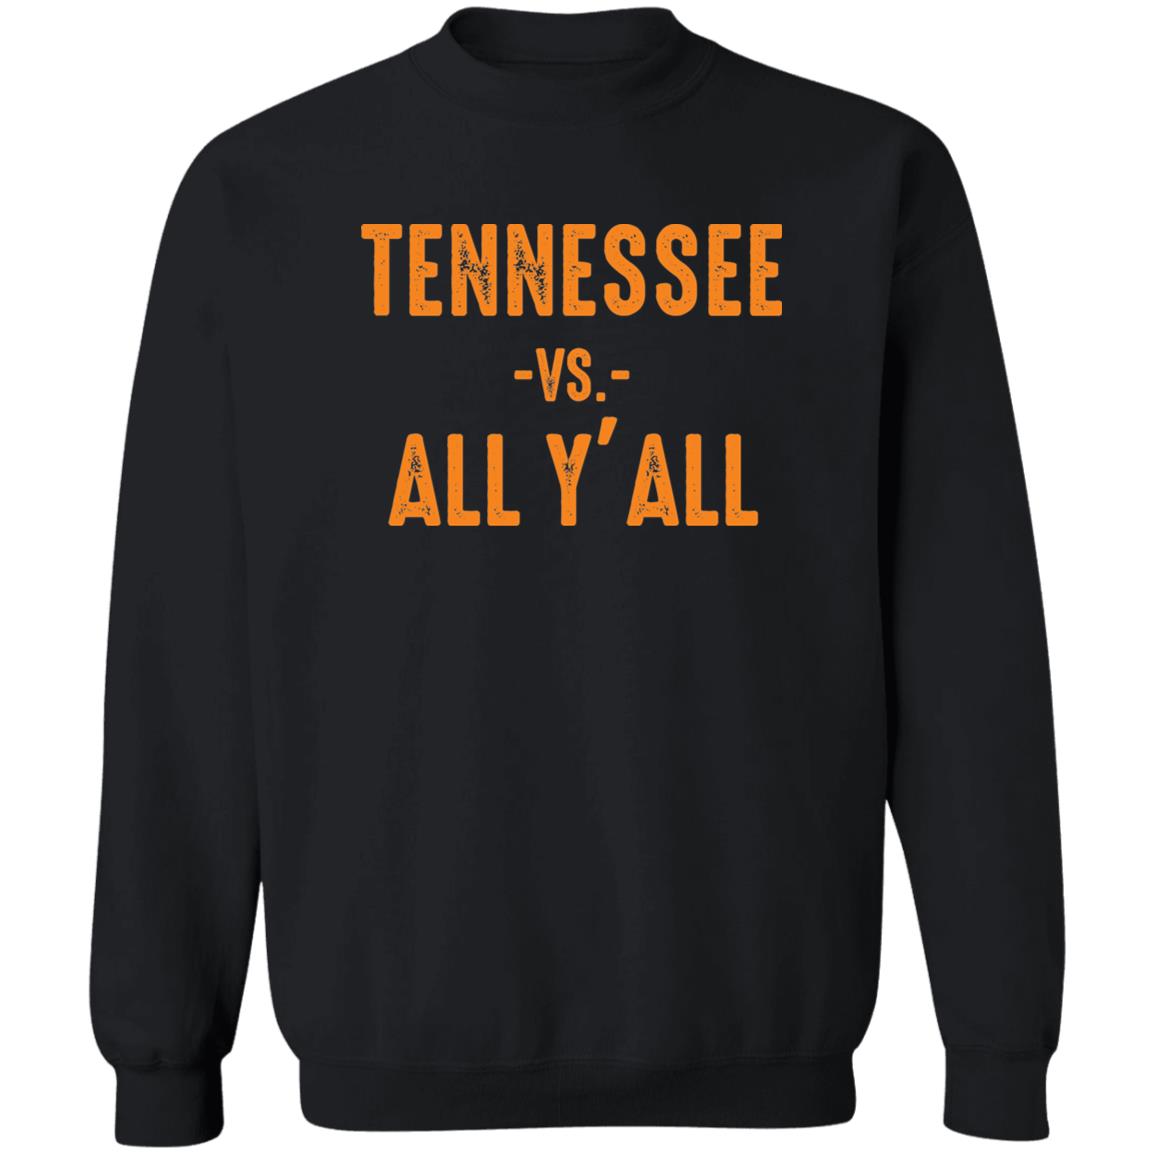 Tennessee Vs All Y’all Shirt 2